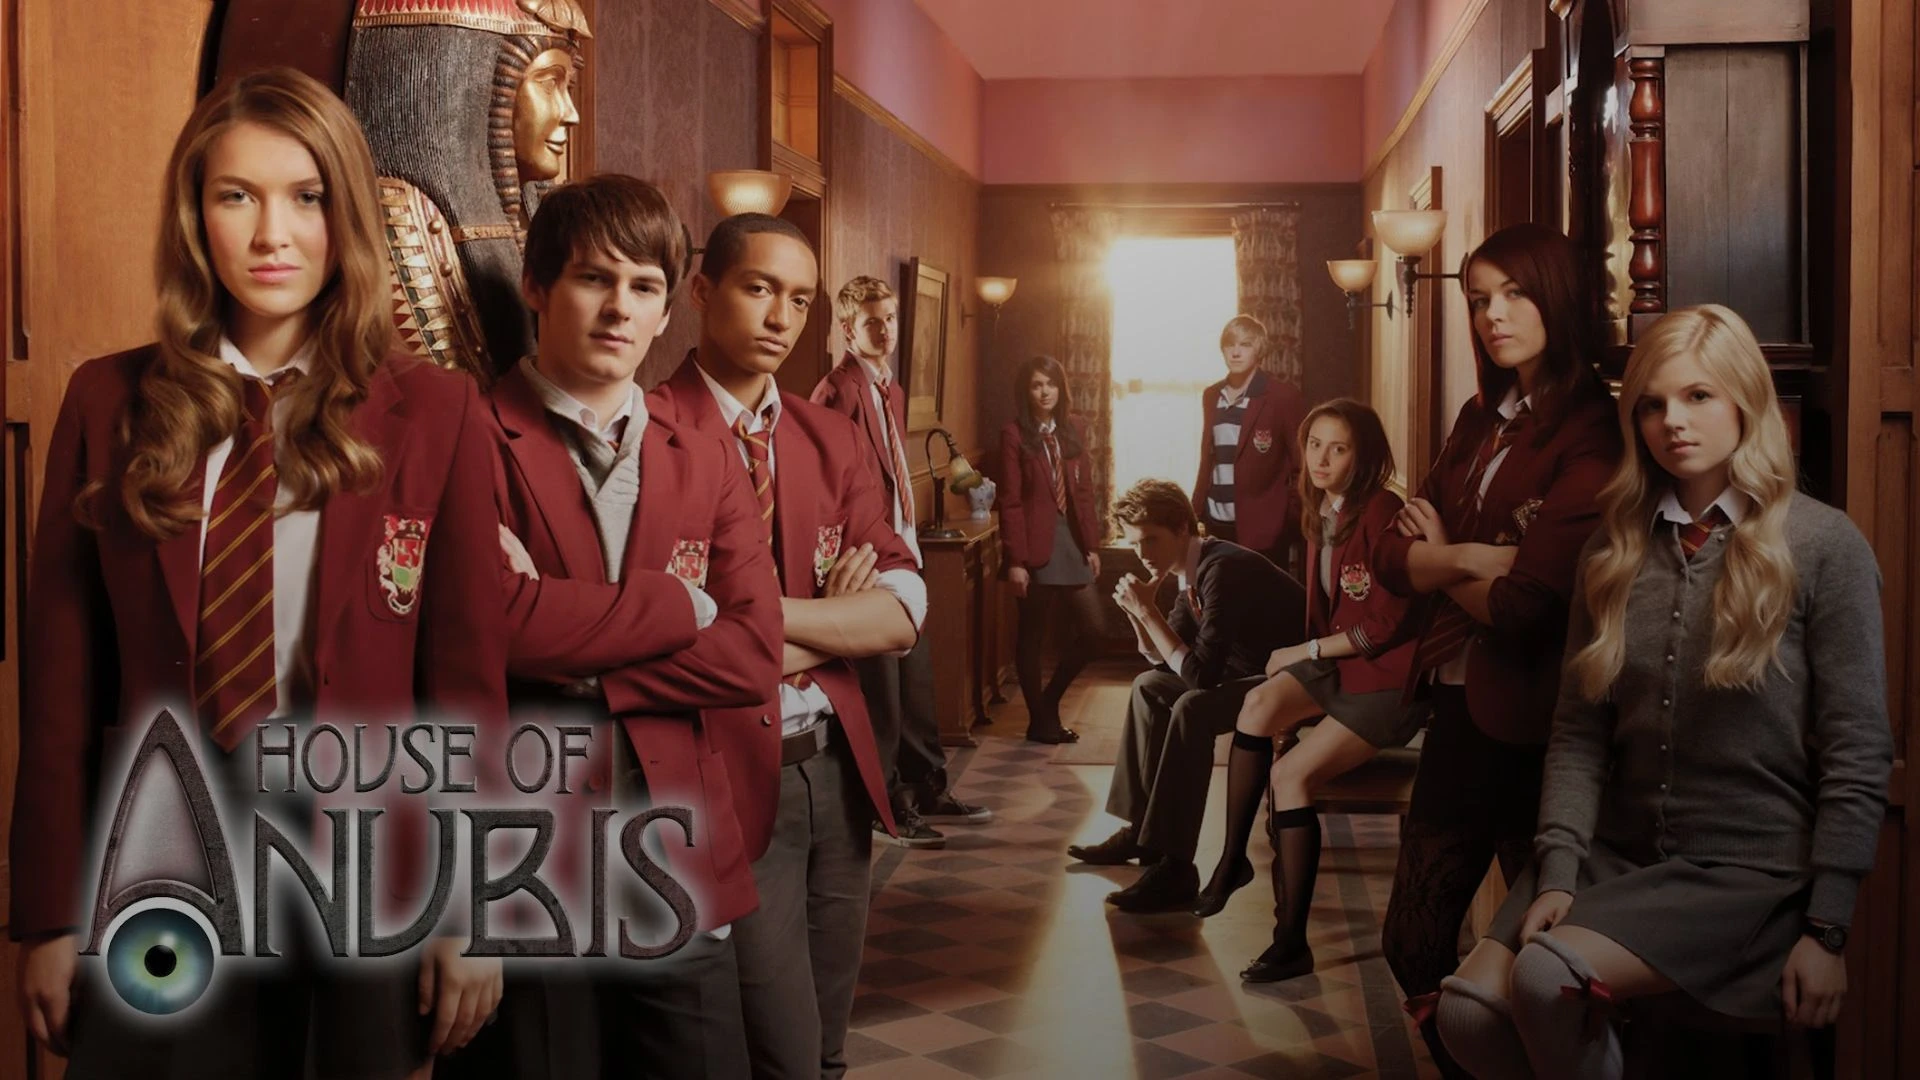 House of Anubis Parents Guide